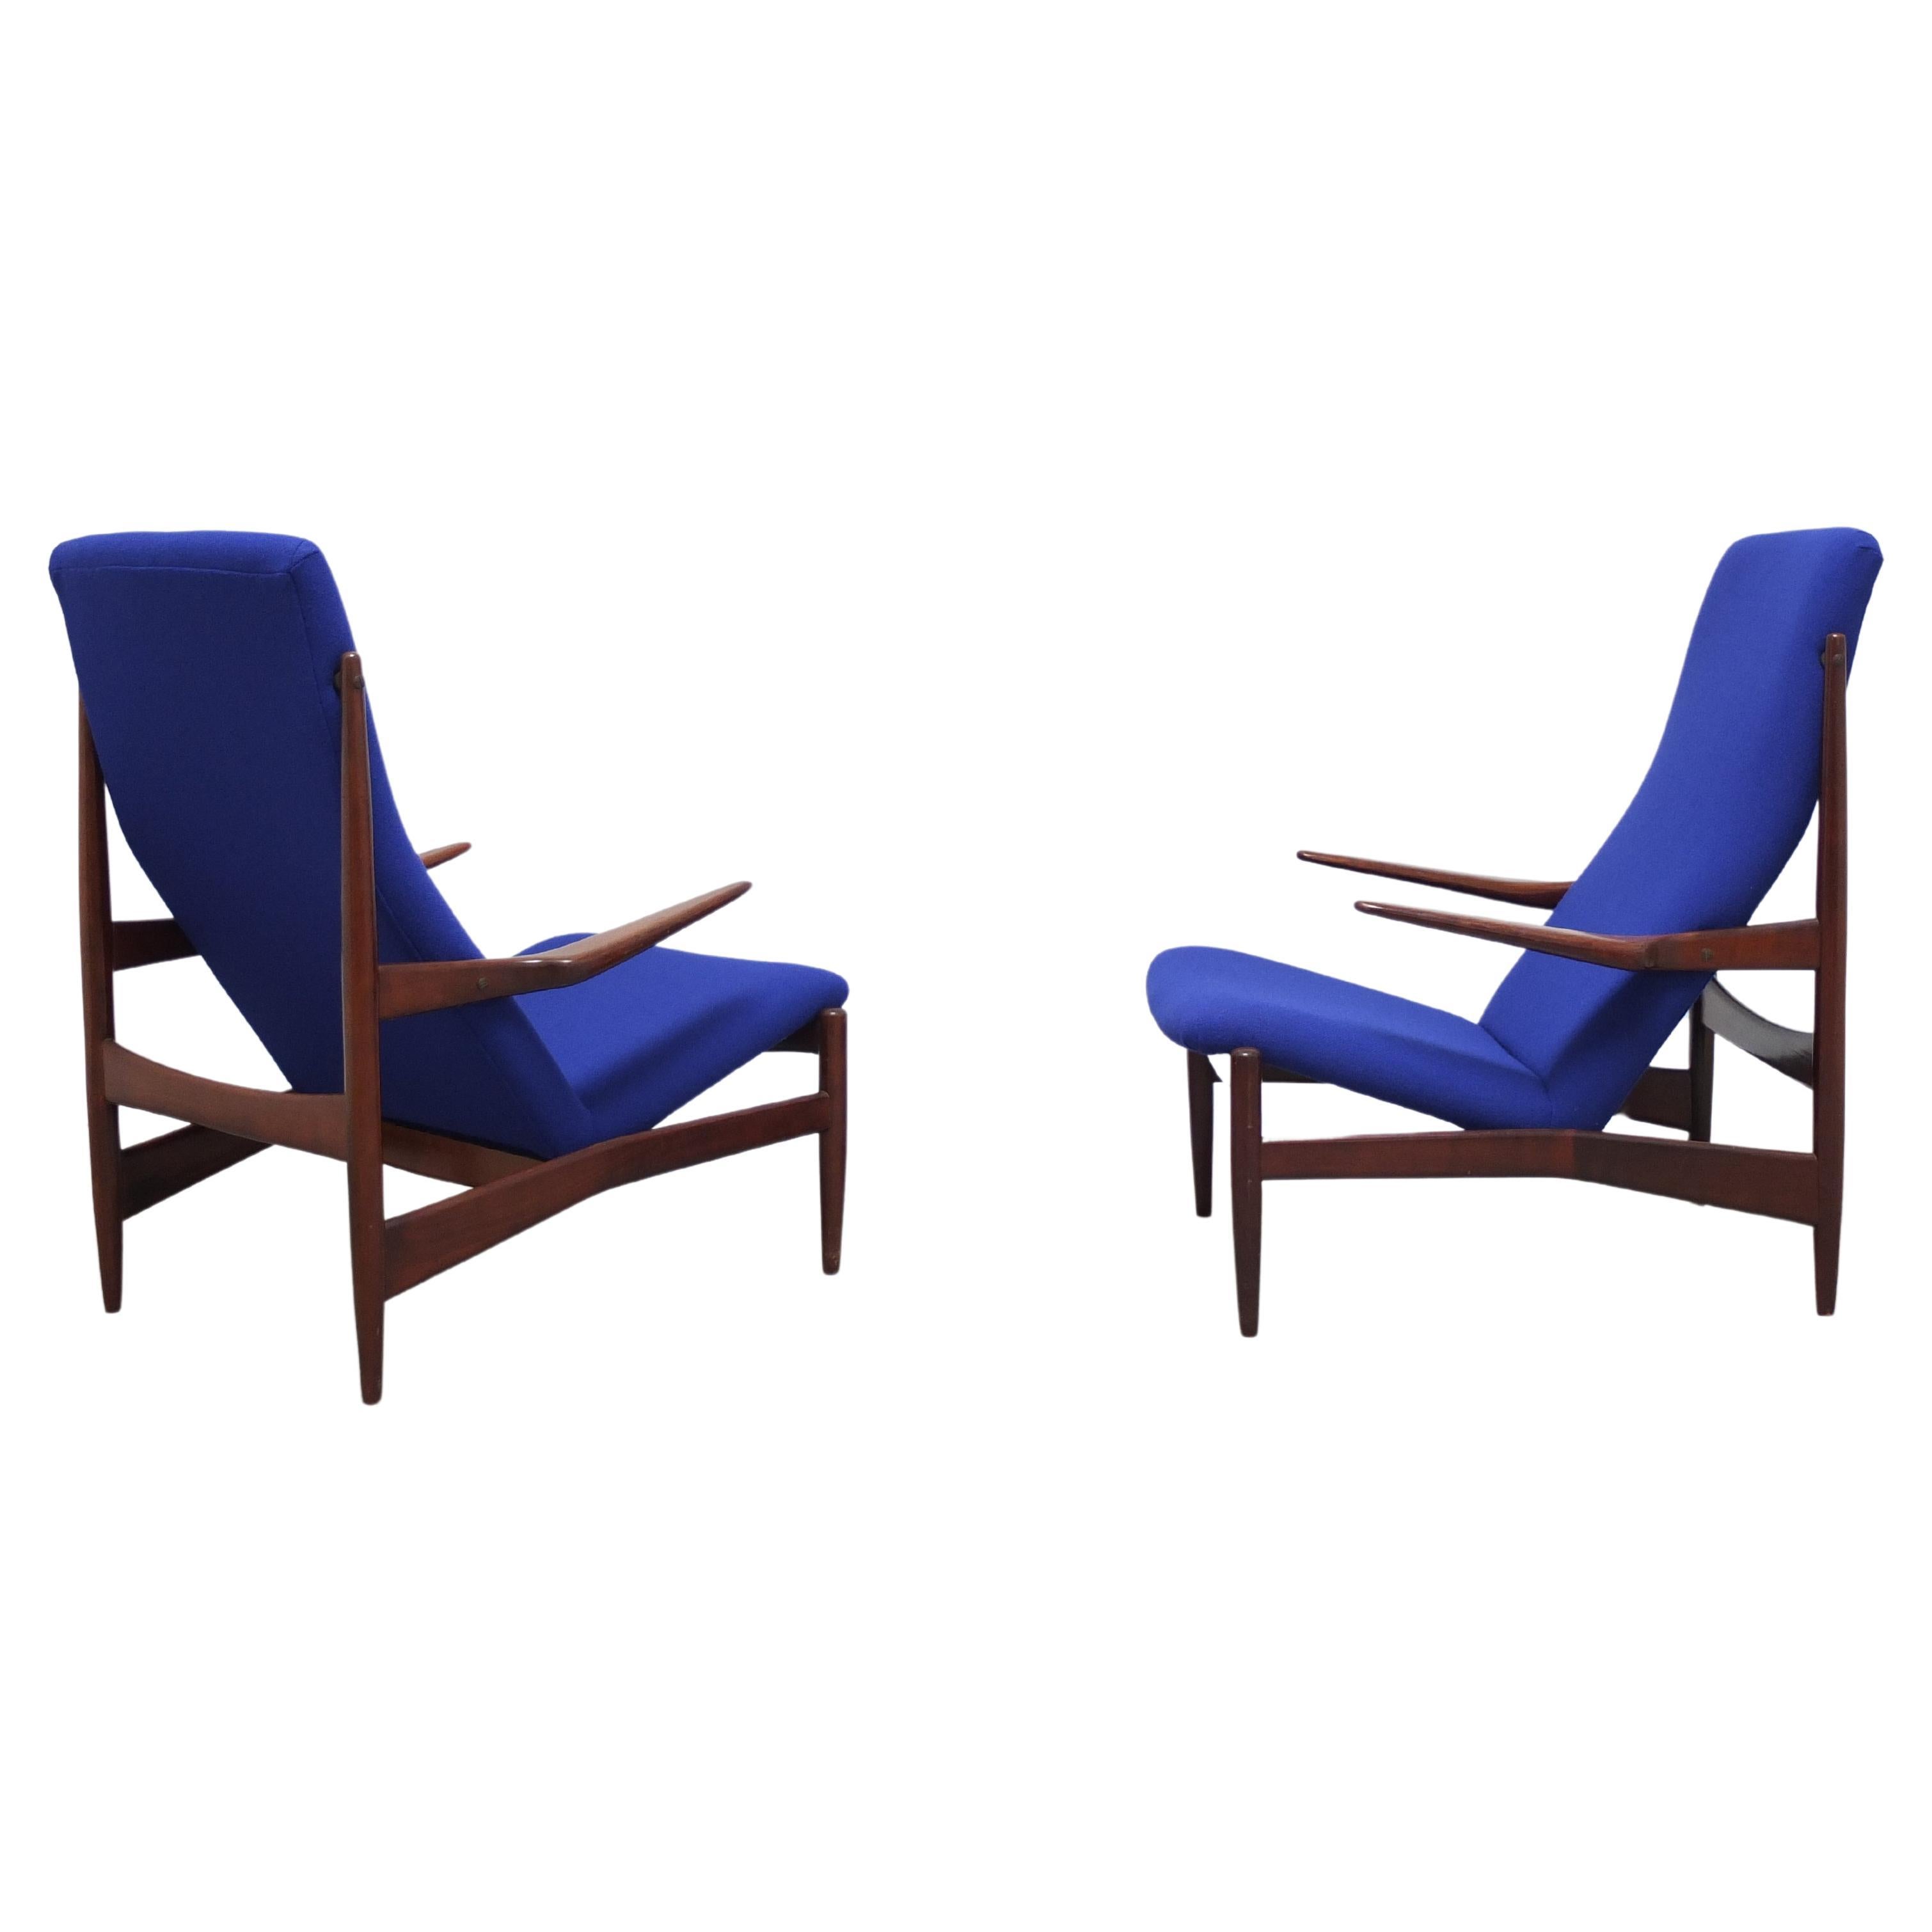 Rare Pair of Lounge Chairs by Alfred Hendrickx for Belform, 1950s For Sale